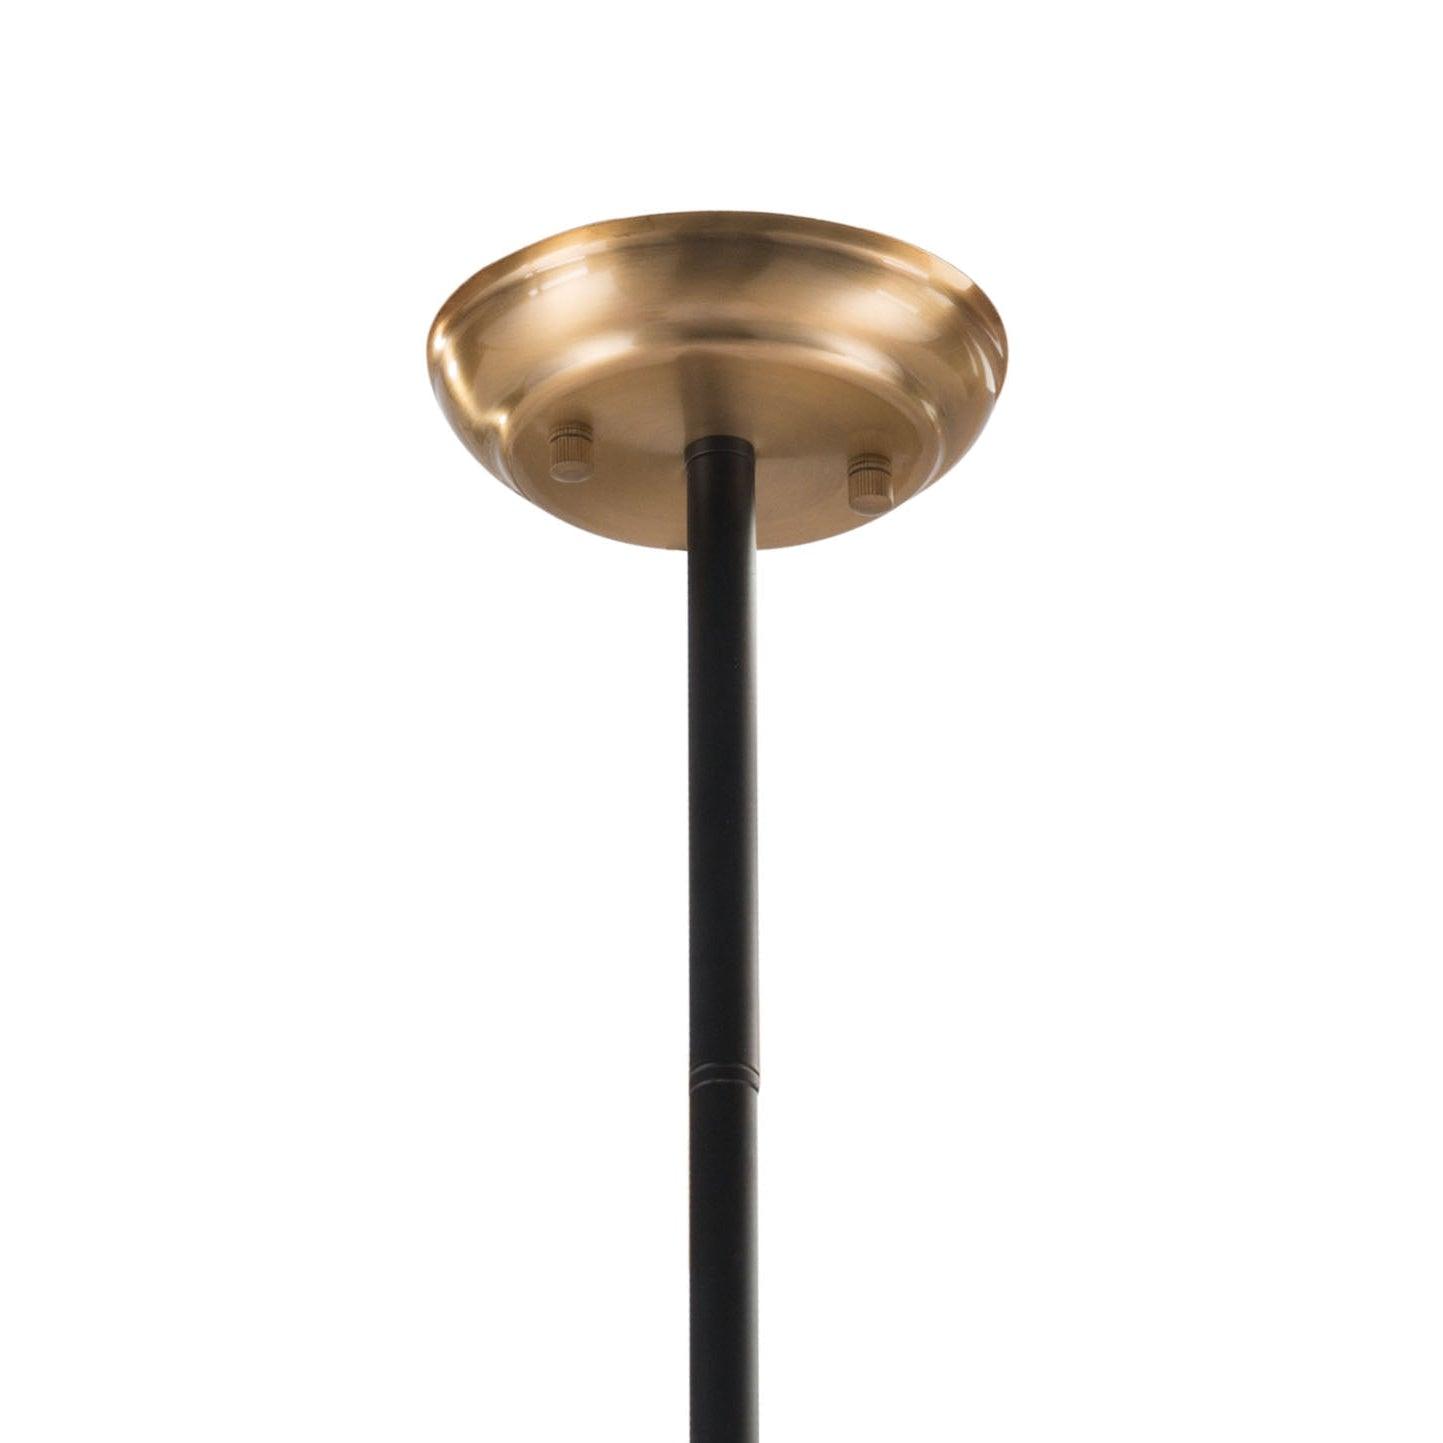 Richiza Ceiling Lamp Black - Sideboards and Things Brand_Zuo Modern, Color_Black, Depth_0-10, Features_Adjustable Height, Finish_Hand Painted, Finish_Polished, Finish_Powder Coated, Glass Type_Frosted Glass, Height_20-30, Materials_Glass, Materials_Metal, Metal Type_Steel, Product Type_Pendant, Width_40-50